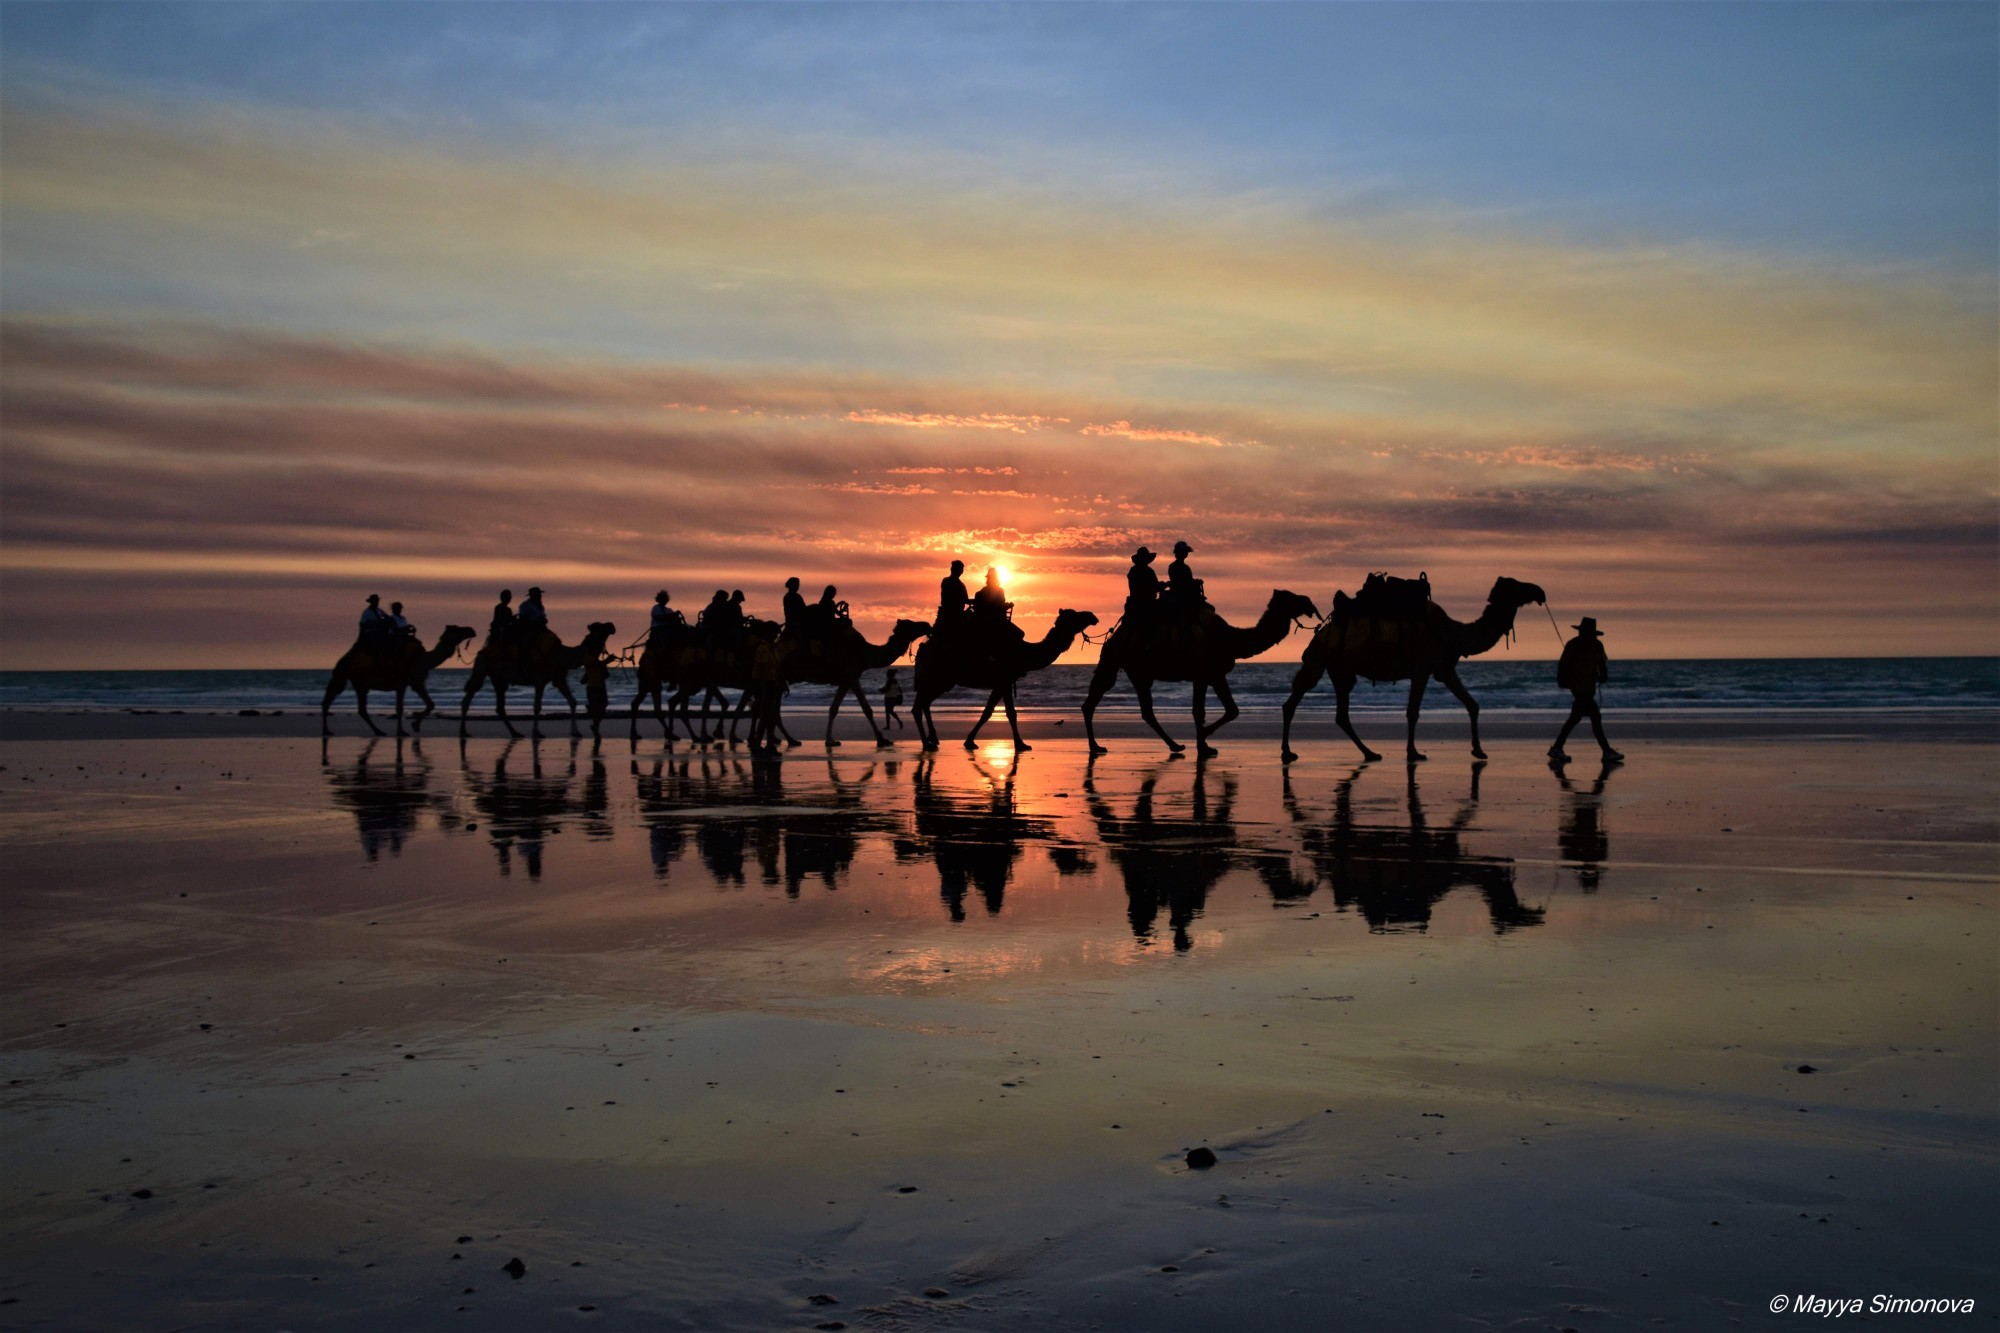 Cable Beach — 22 km stretch of white sand beach on the eastern Indian Ocean and the name of the surrounding suburb in Broome, Western Australia.